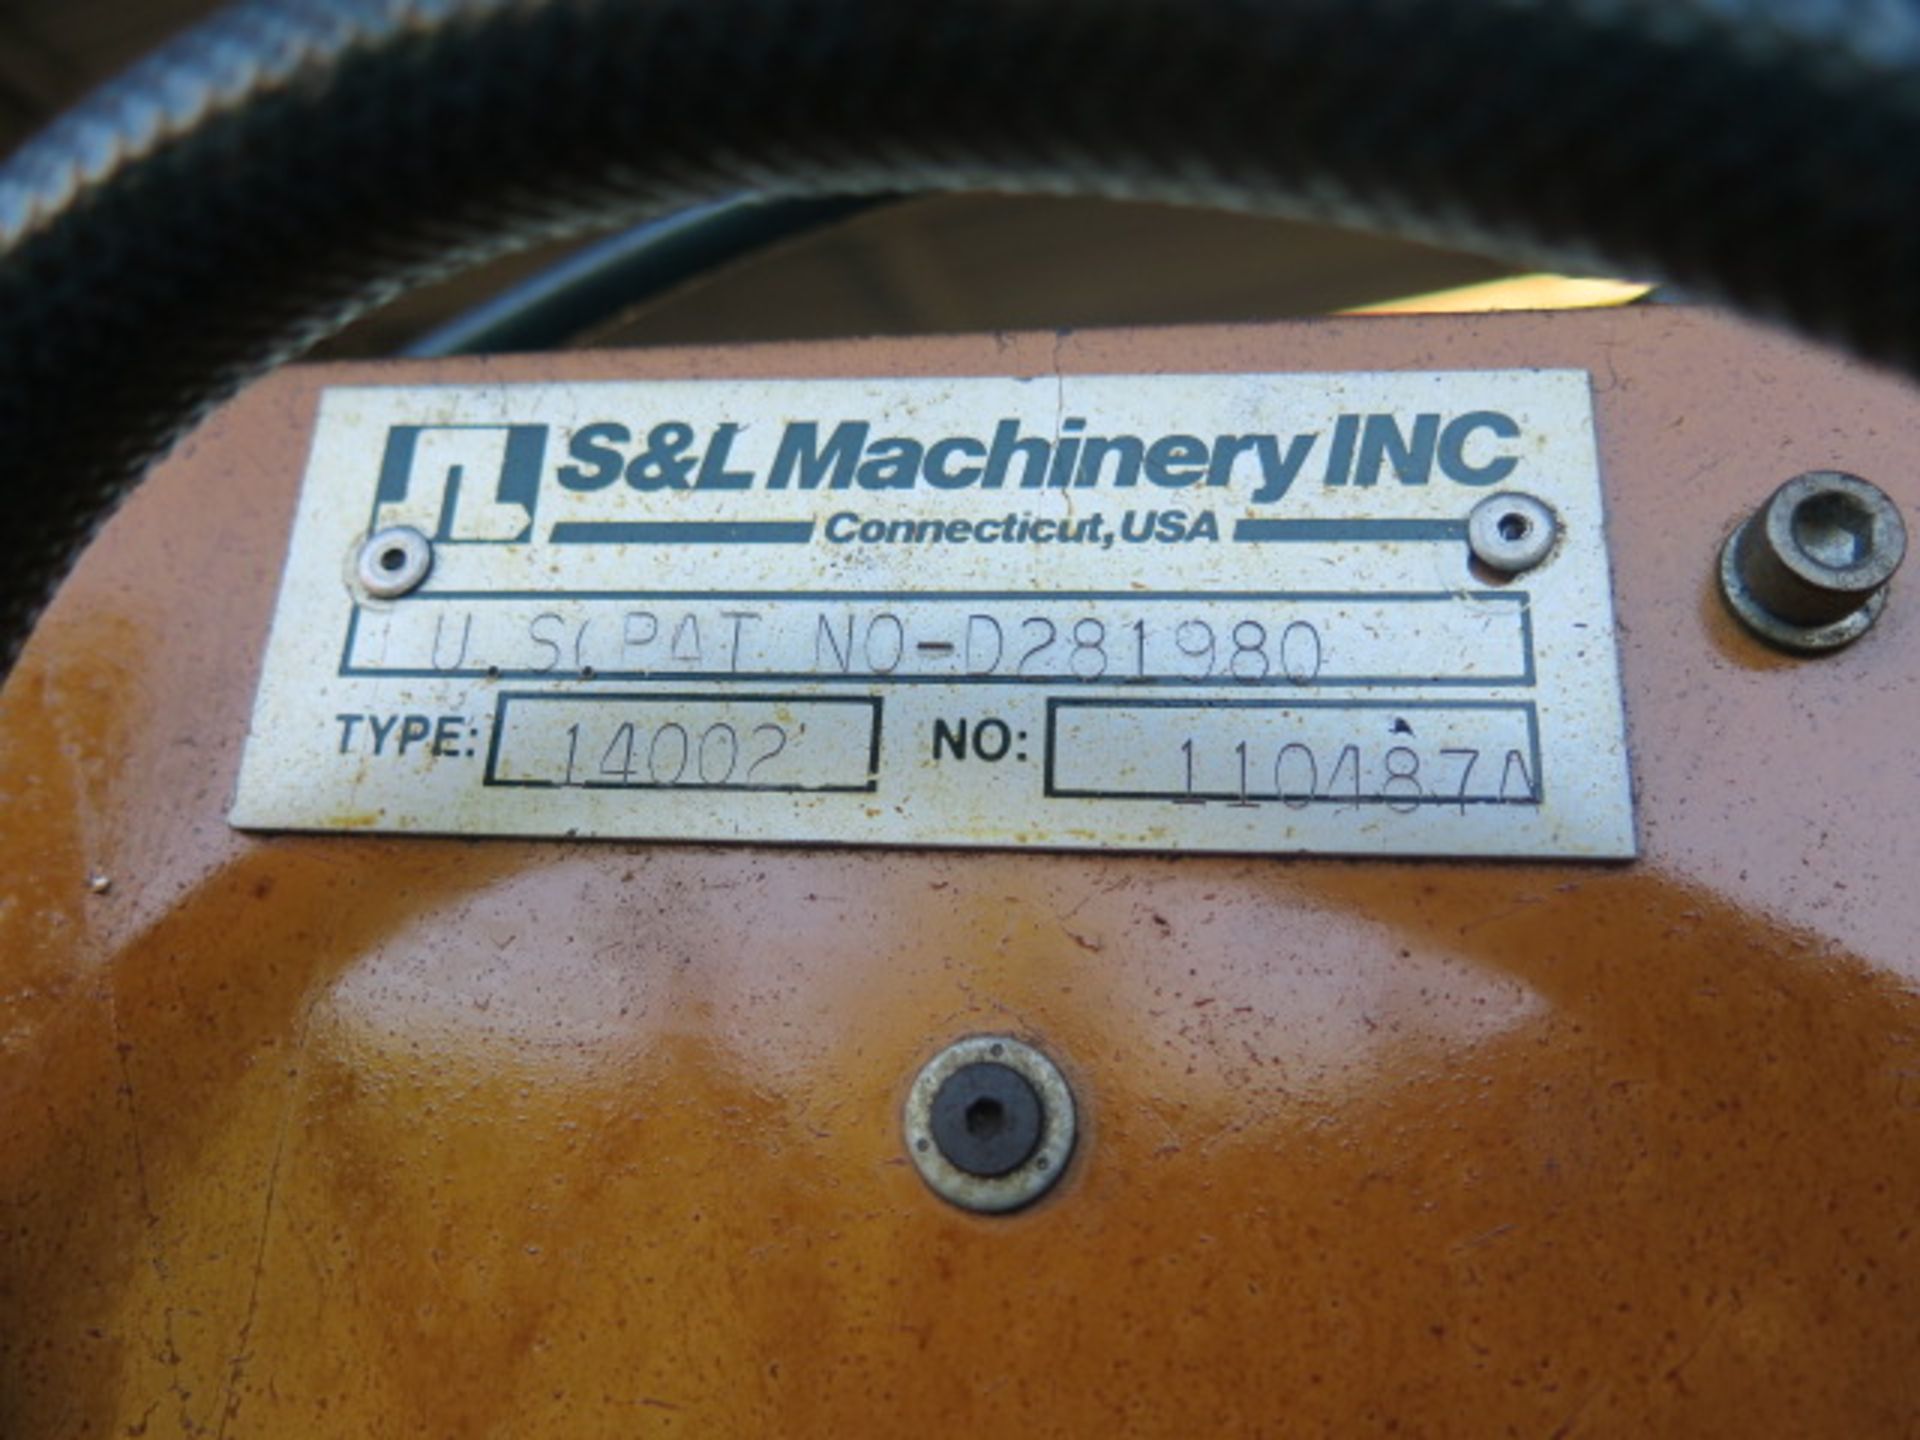 S & L Machinery Type 14002 Pneumatic Tapping Arm w/ Base Plate - Image 3 of 3